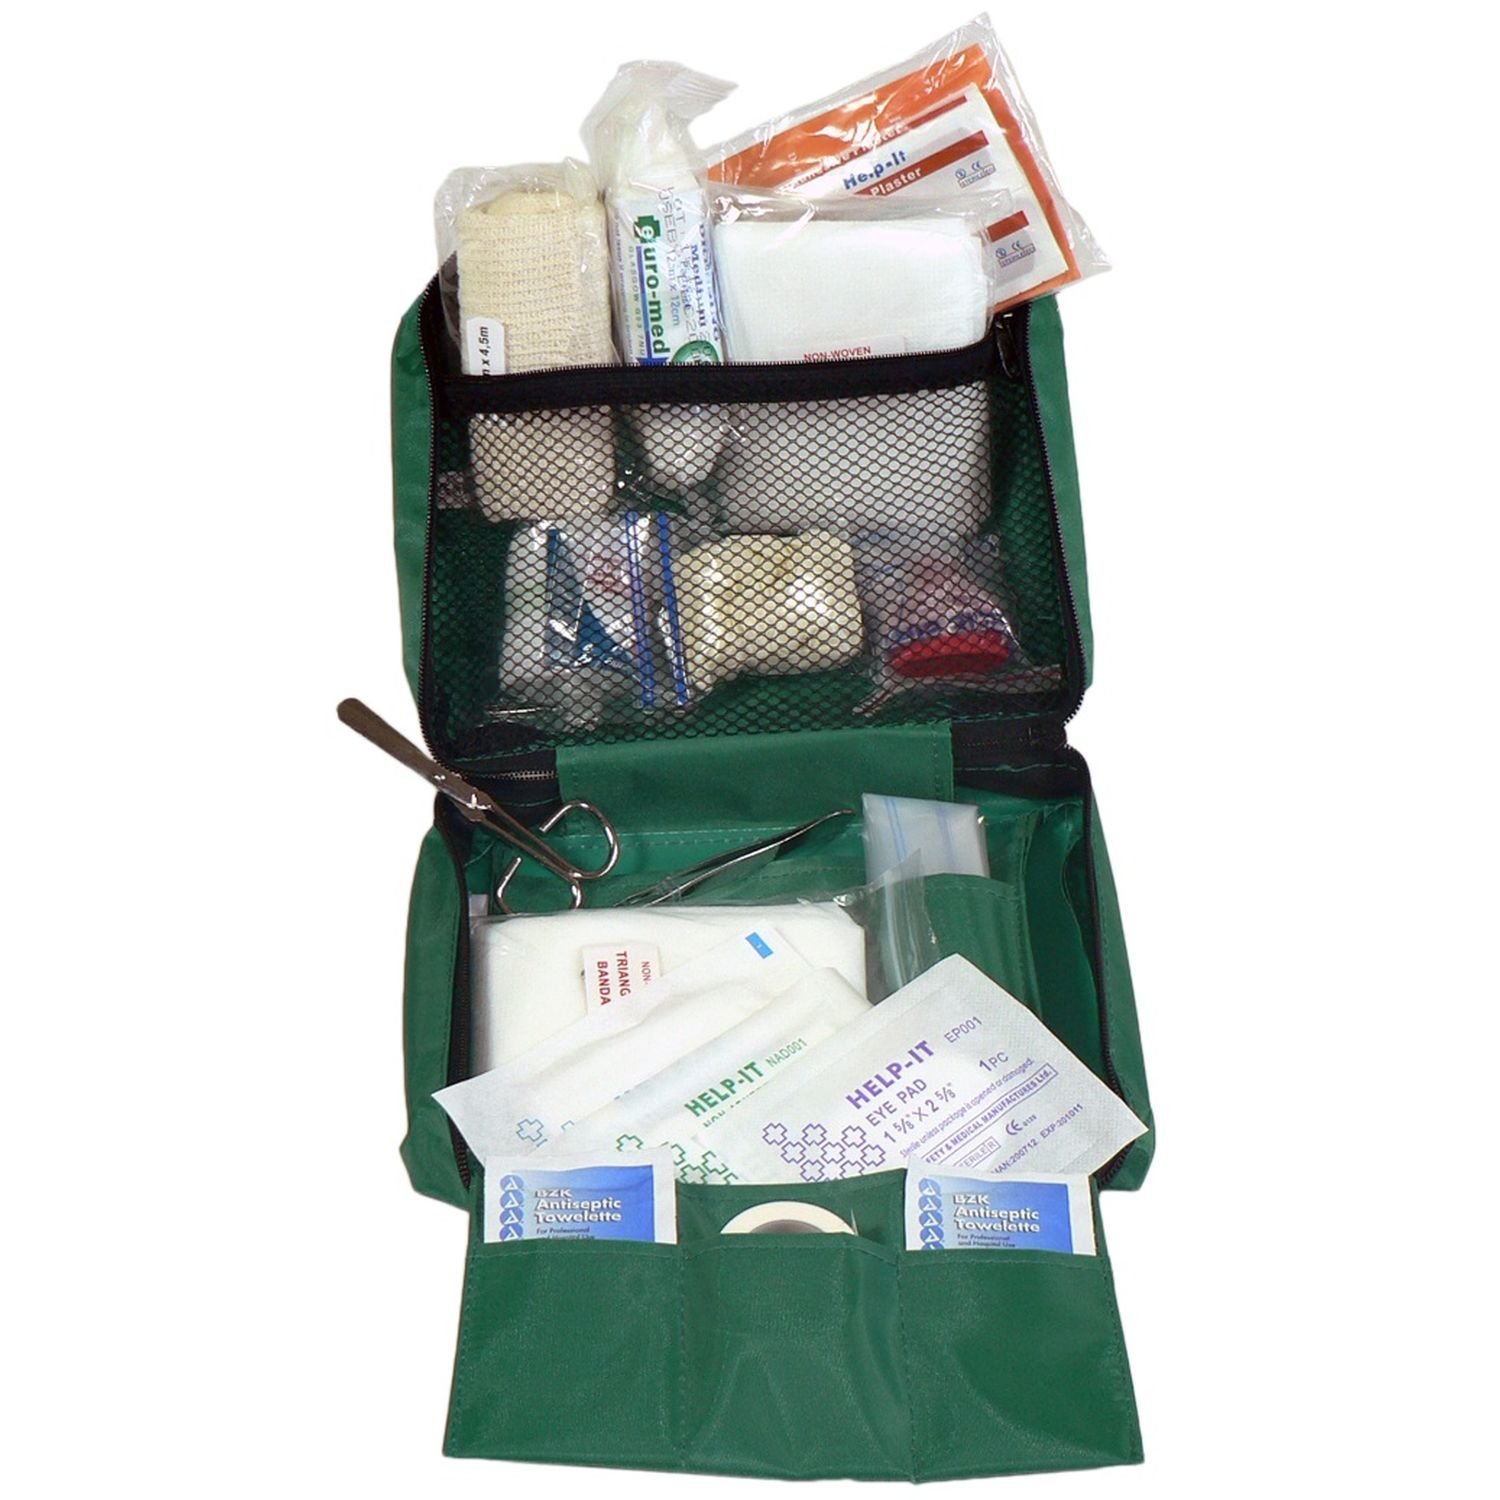 Lone Worker 1 Economy Vehicle First Aid Kit